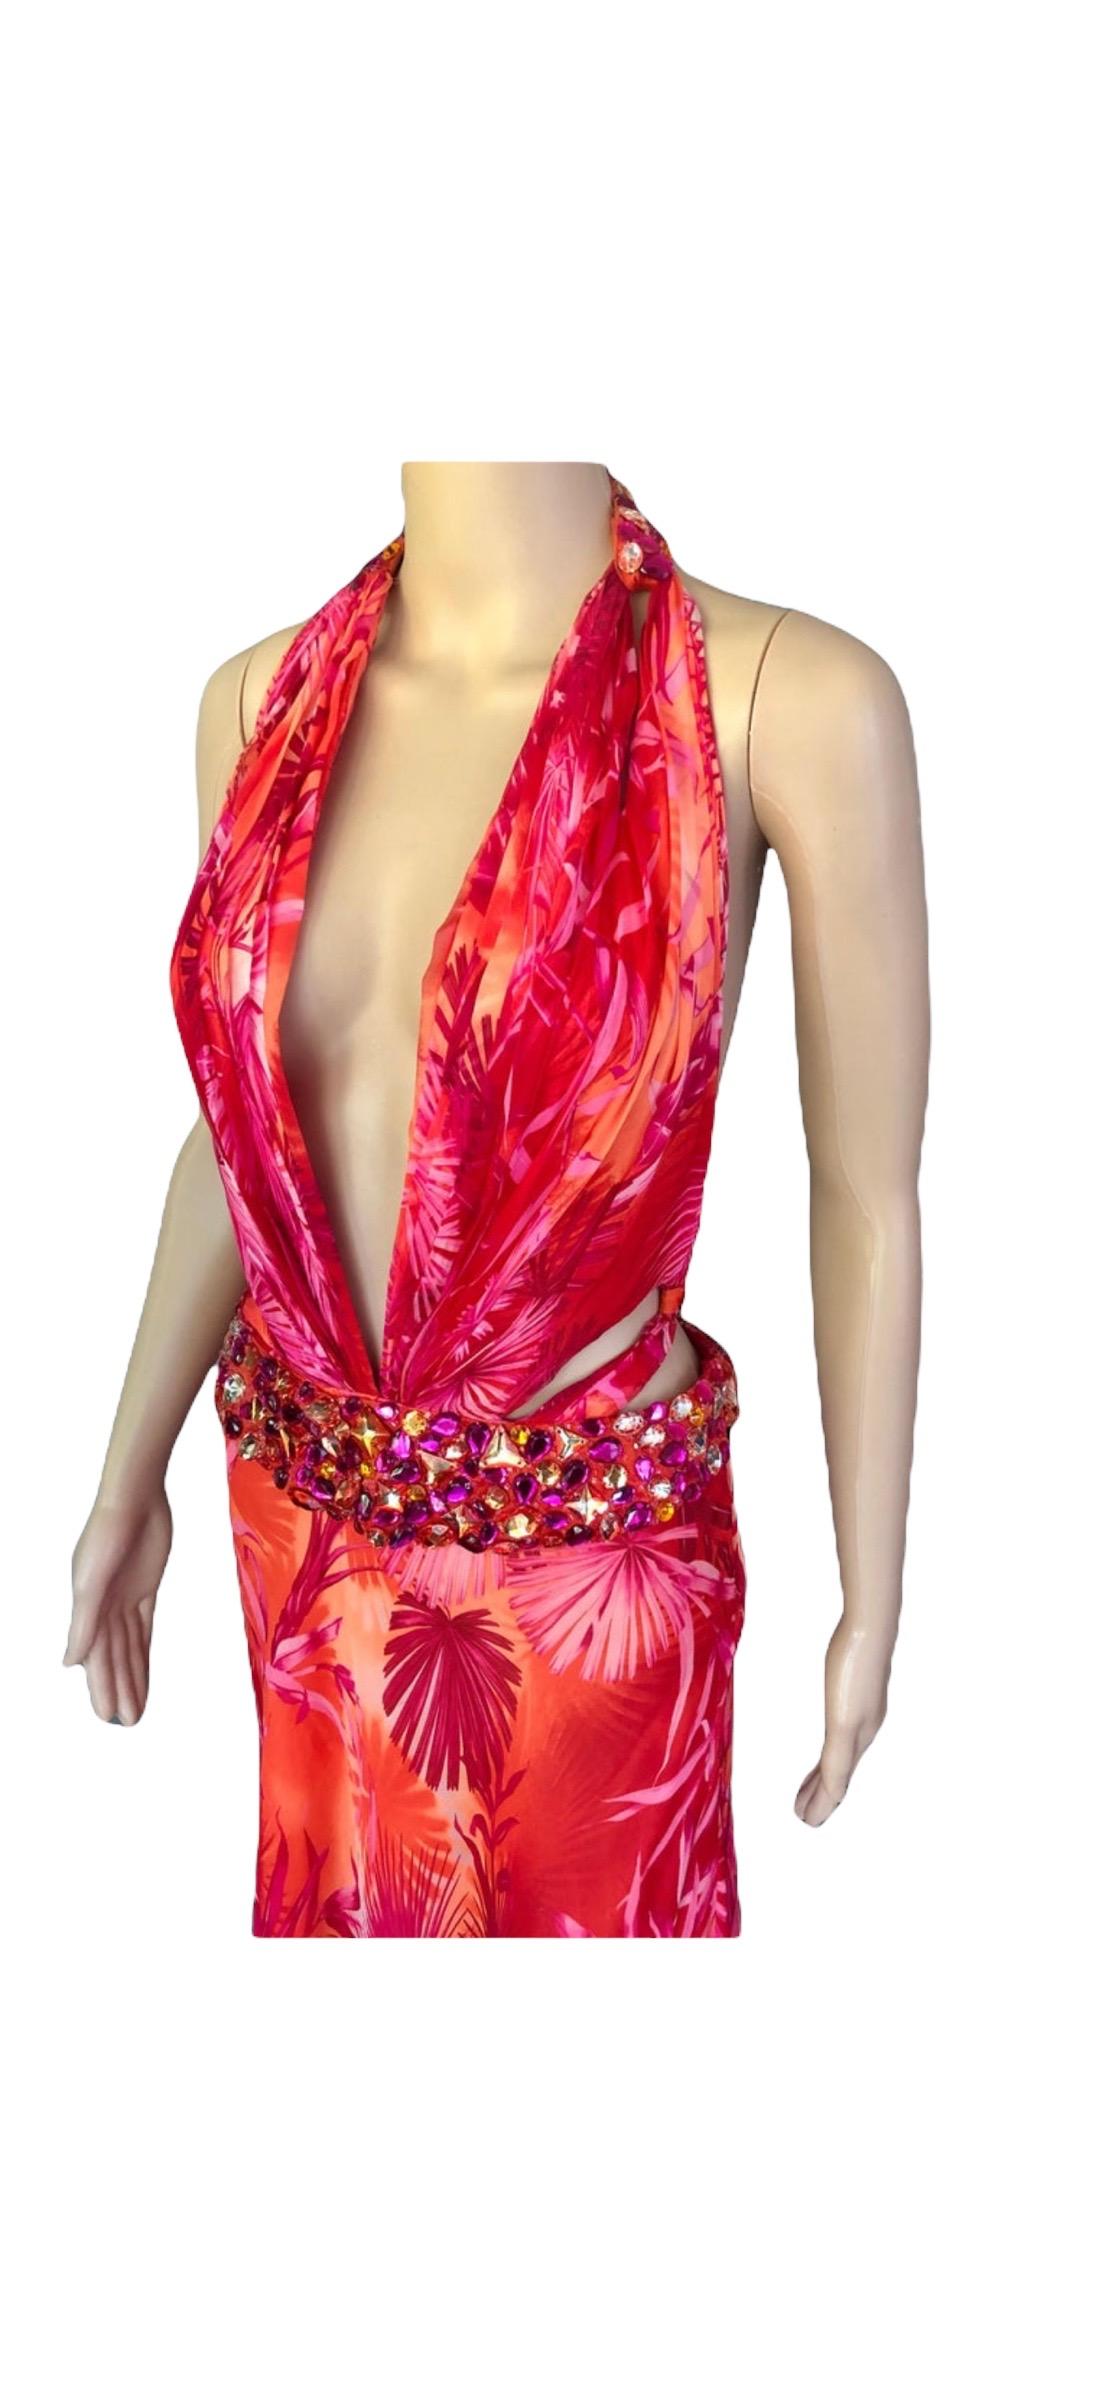 Gianni Versace S/S 2000 Runway Embellished Jungle Print Evening Dress Gown 2